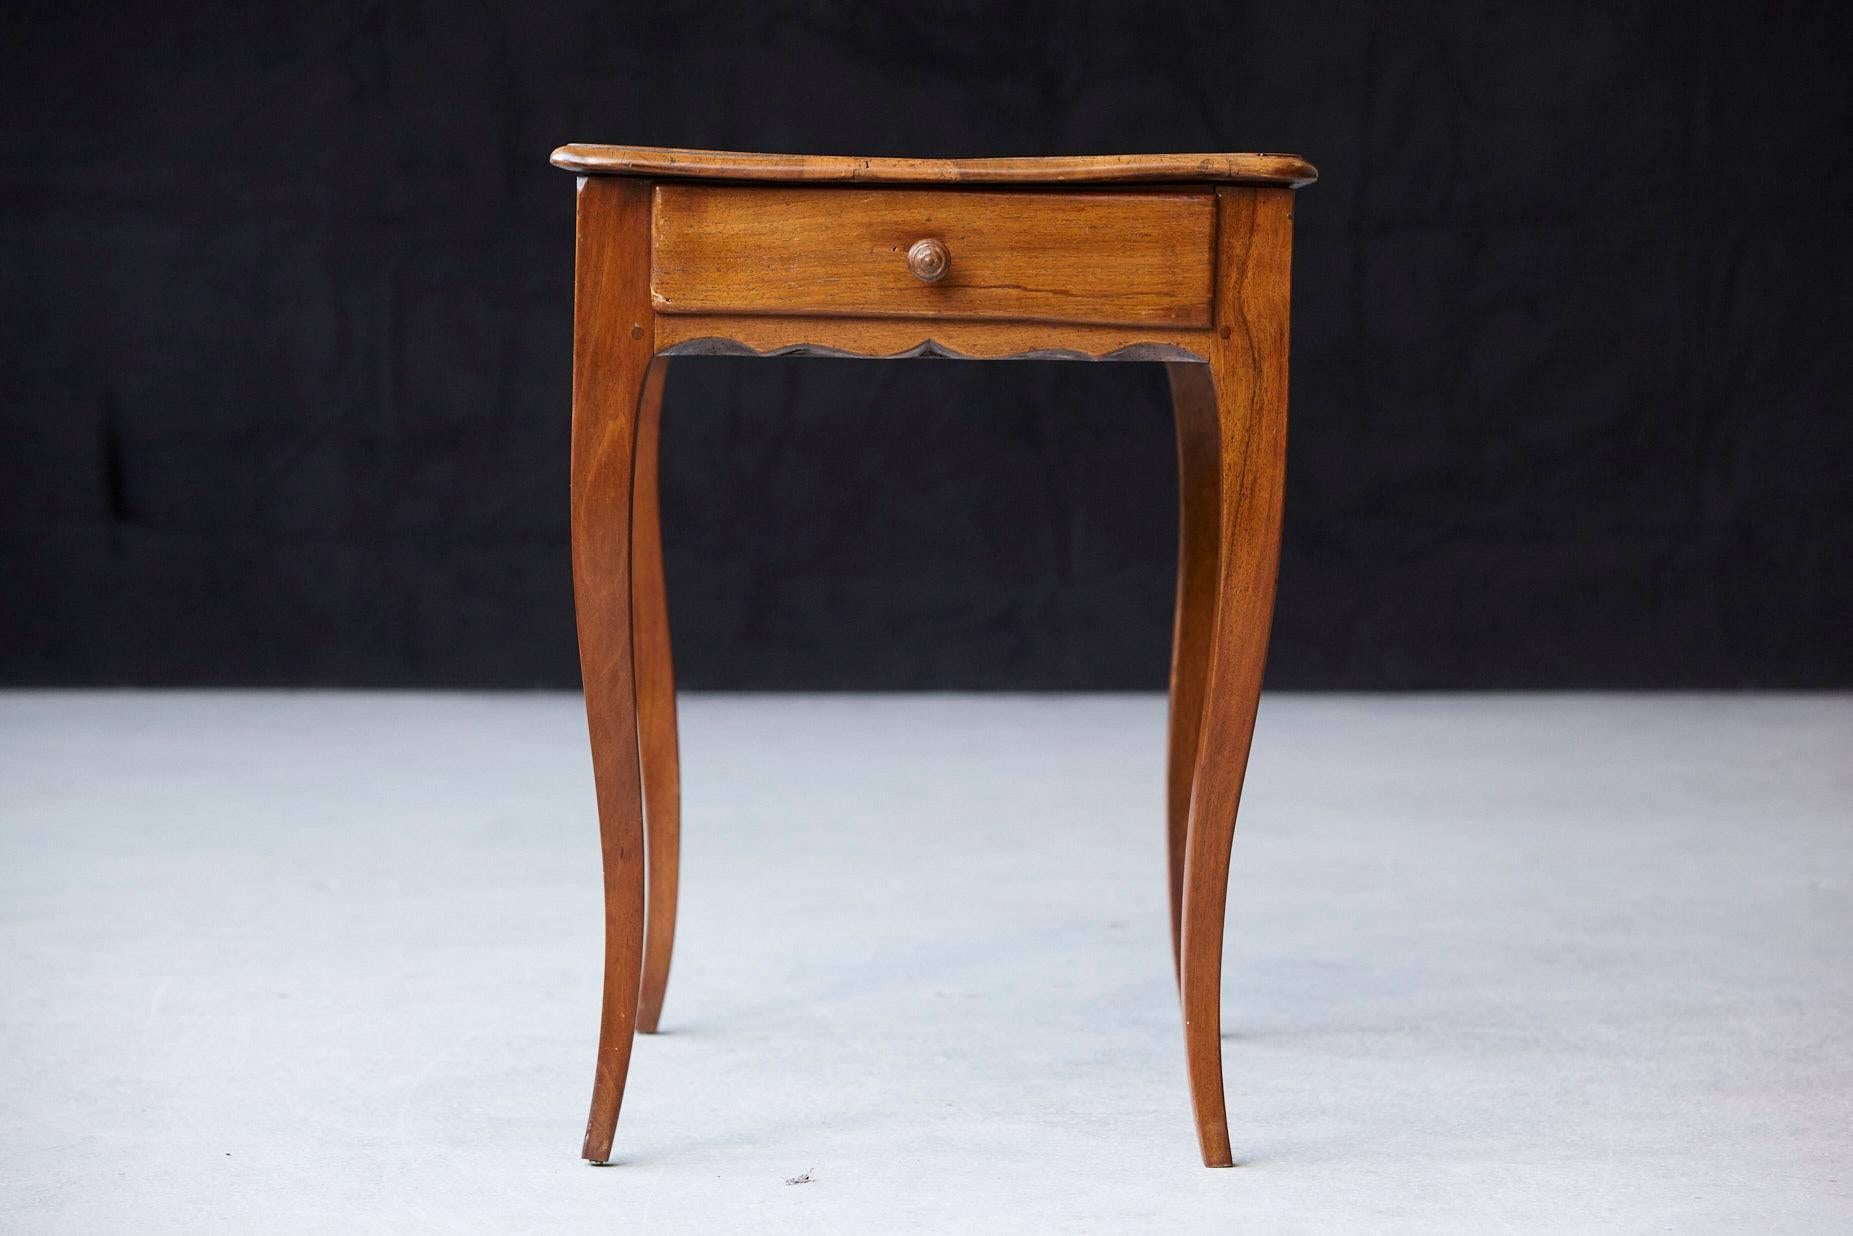 Charming late 19th century, circa 1890s, occasional table in walnut, featuring single frieze drawer, a shaped apron raised on cabriole legs.